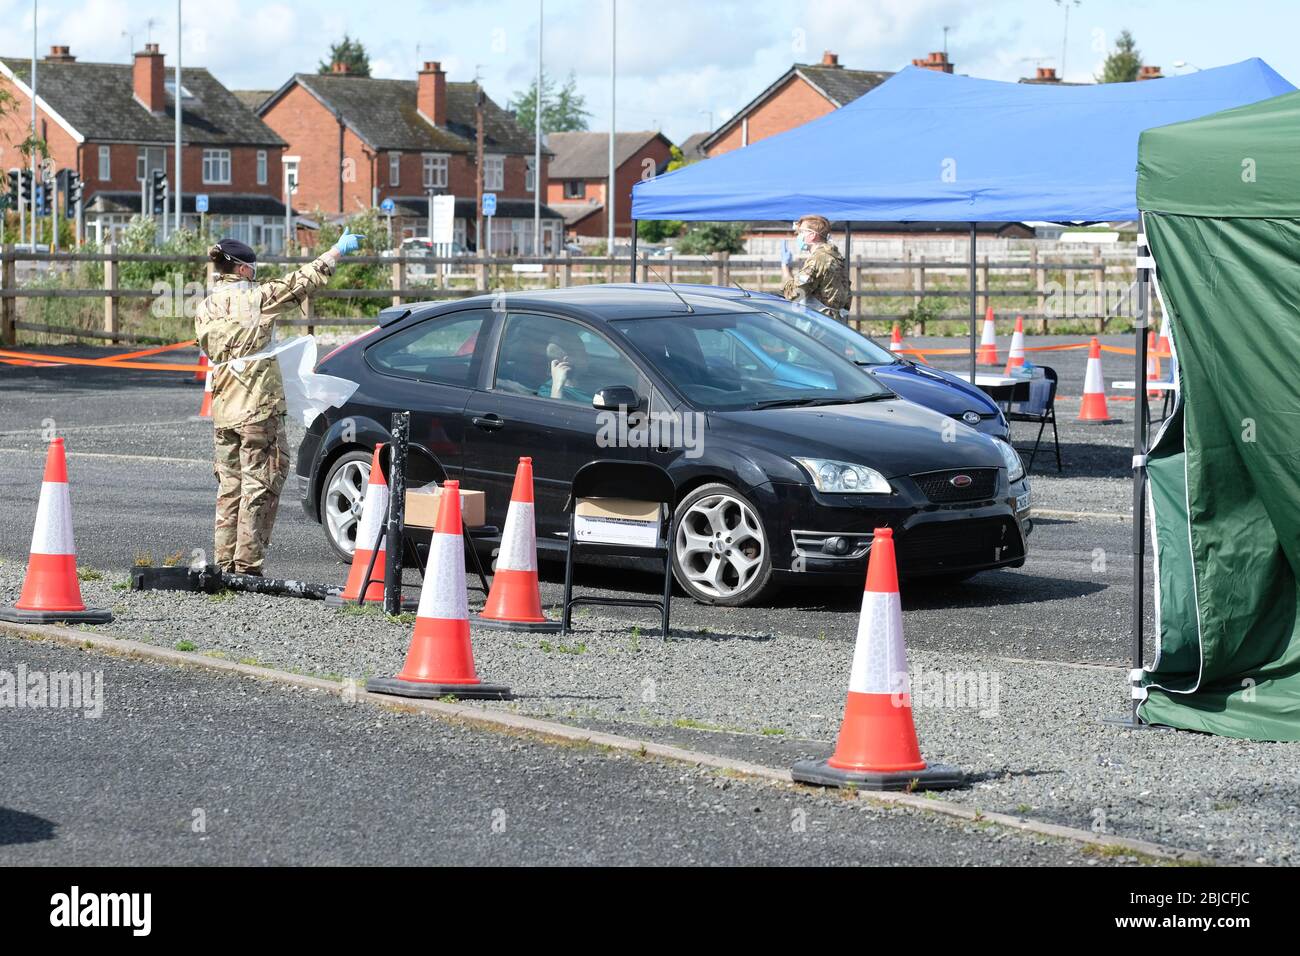 Hereford, Herefordshire UK - Wednesday 29th April 2020 - Army personnel man a pop-up Coronavirus testing site in a car park in Hereford to provide Covid-19 swab tests to frontline workers as the Government strives to reach 100,000 tests per day by the end of April.  Photo Steven May / Alamy Live News Stock Photo